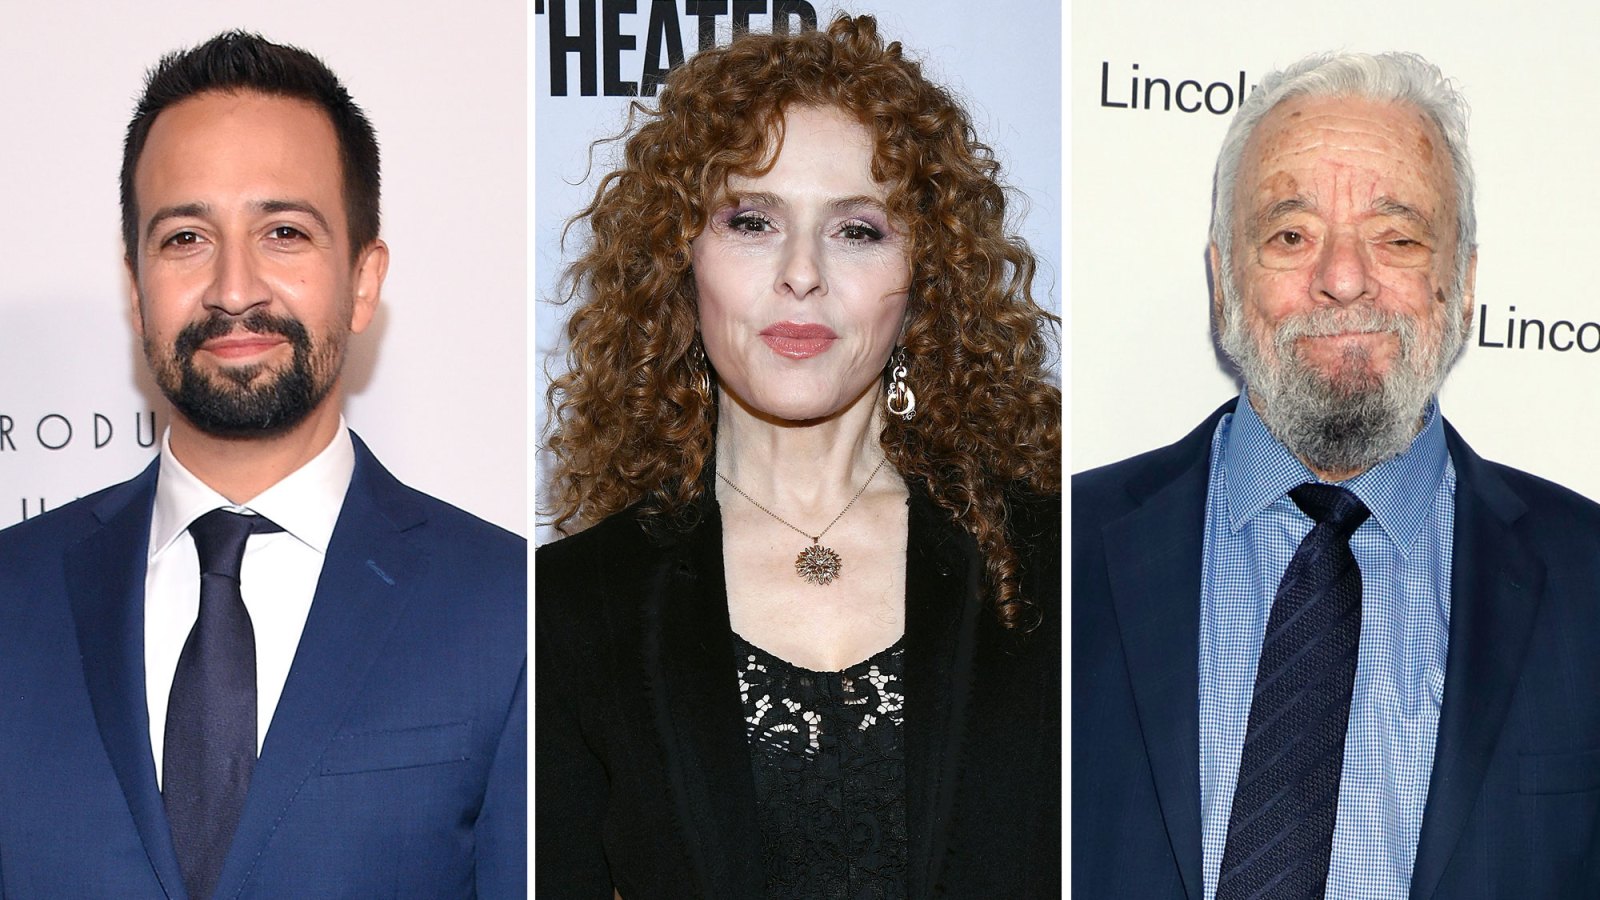 Lin-Manuel Miranda, Bernadette Peters and More Stars Pay Tribute to Late Stephen Sondheim at Tony Awards 2022